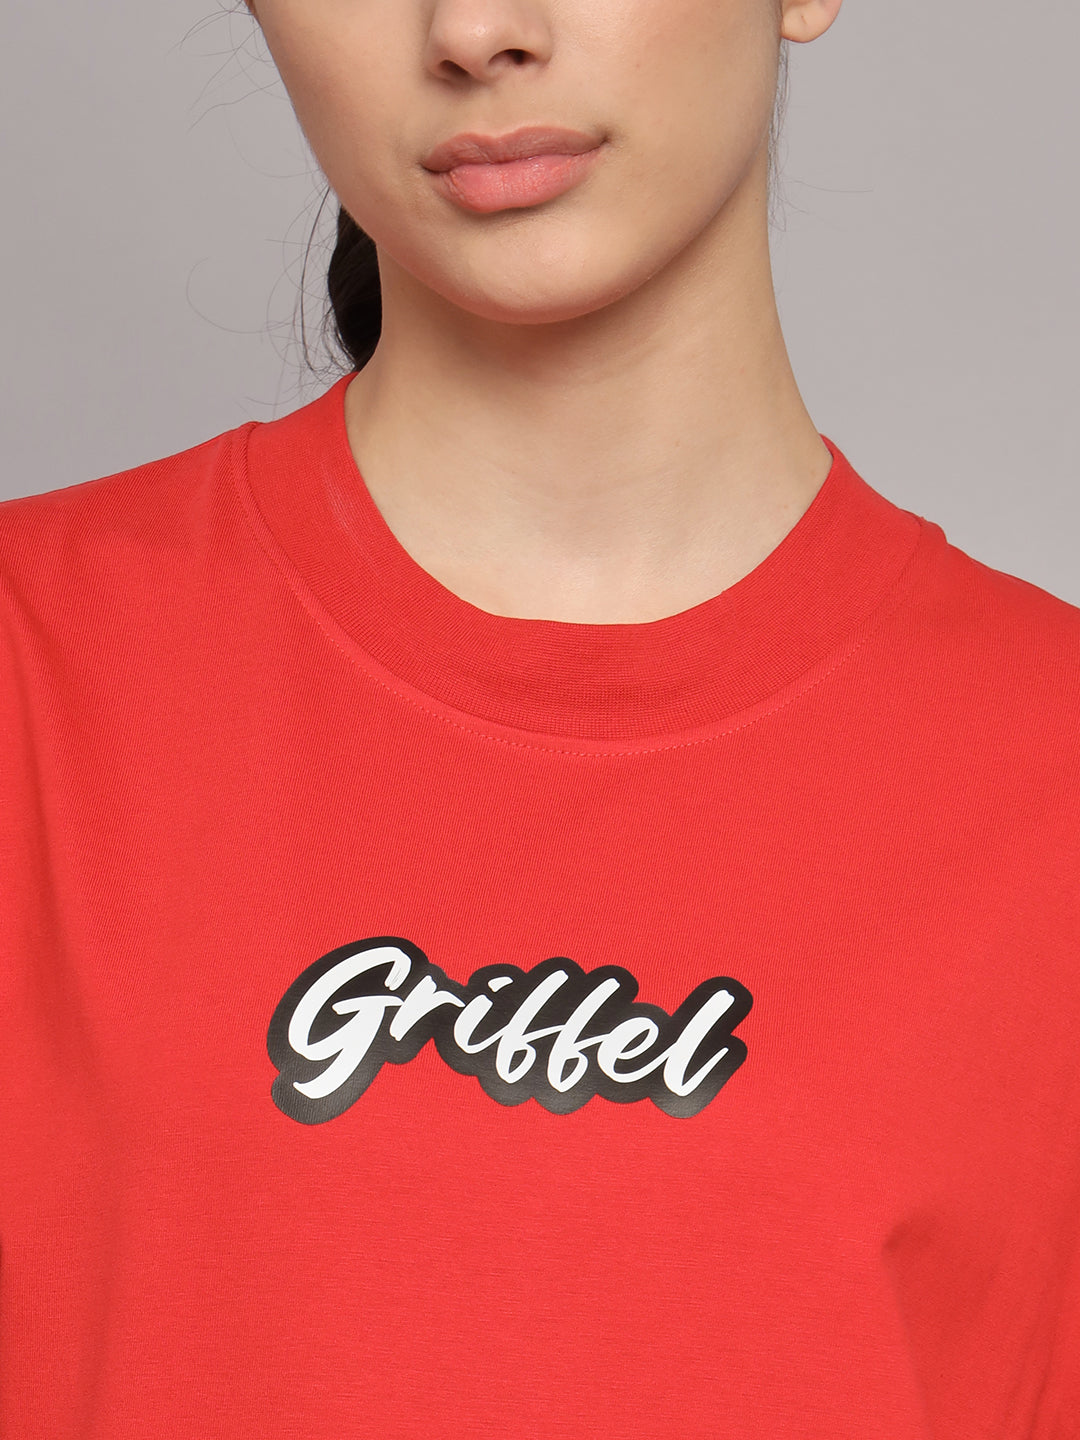 GRIFFEL Women Printed Oversized Loose fit Red T-shirt and Trackpant Set - griffel